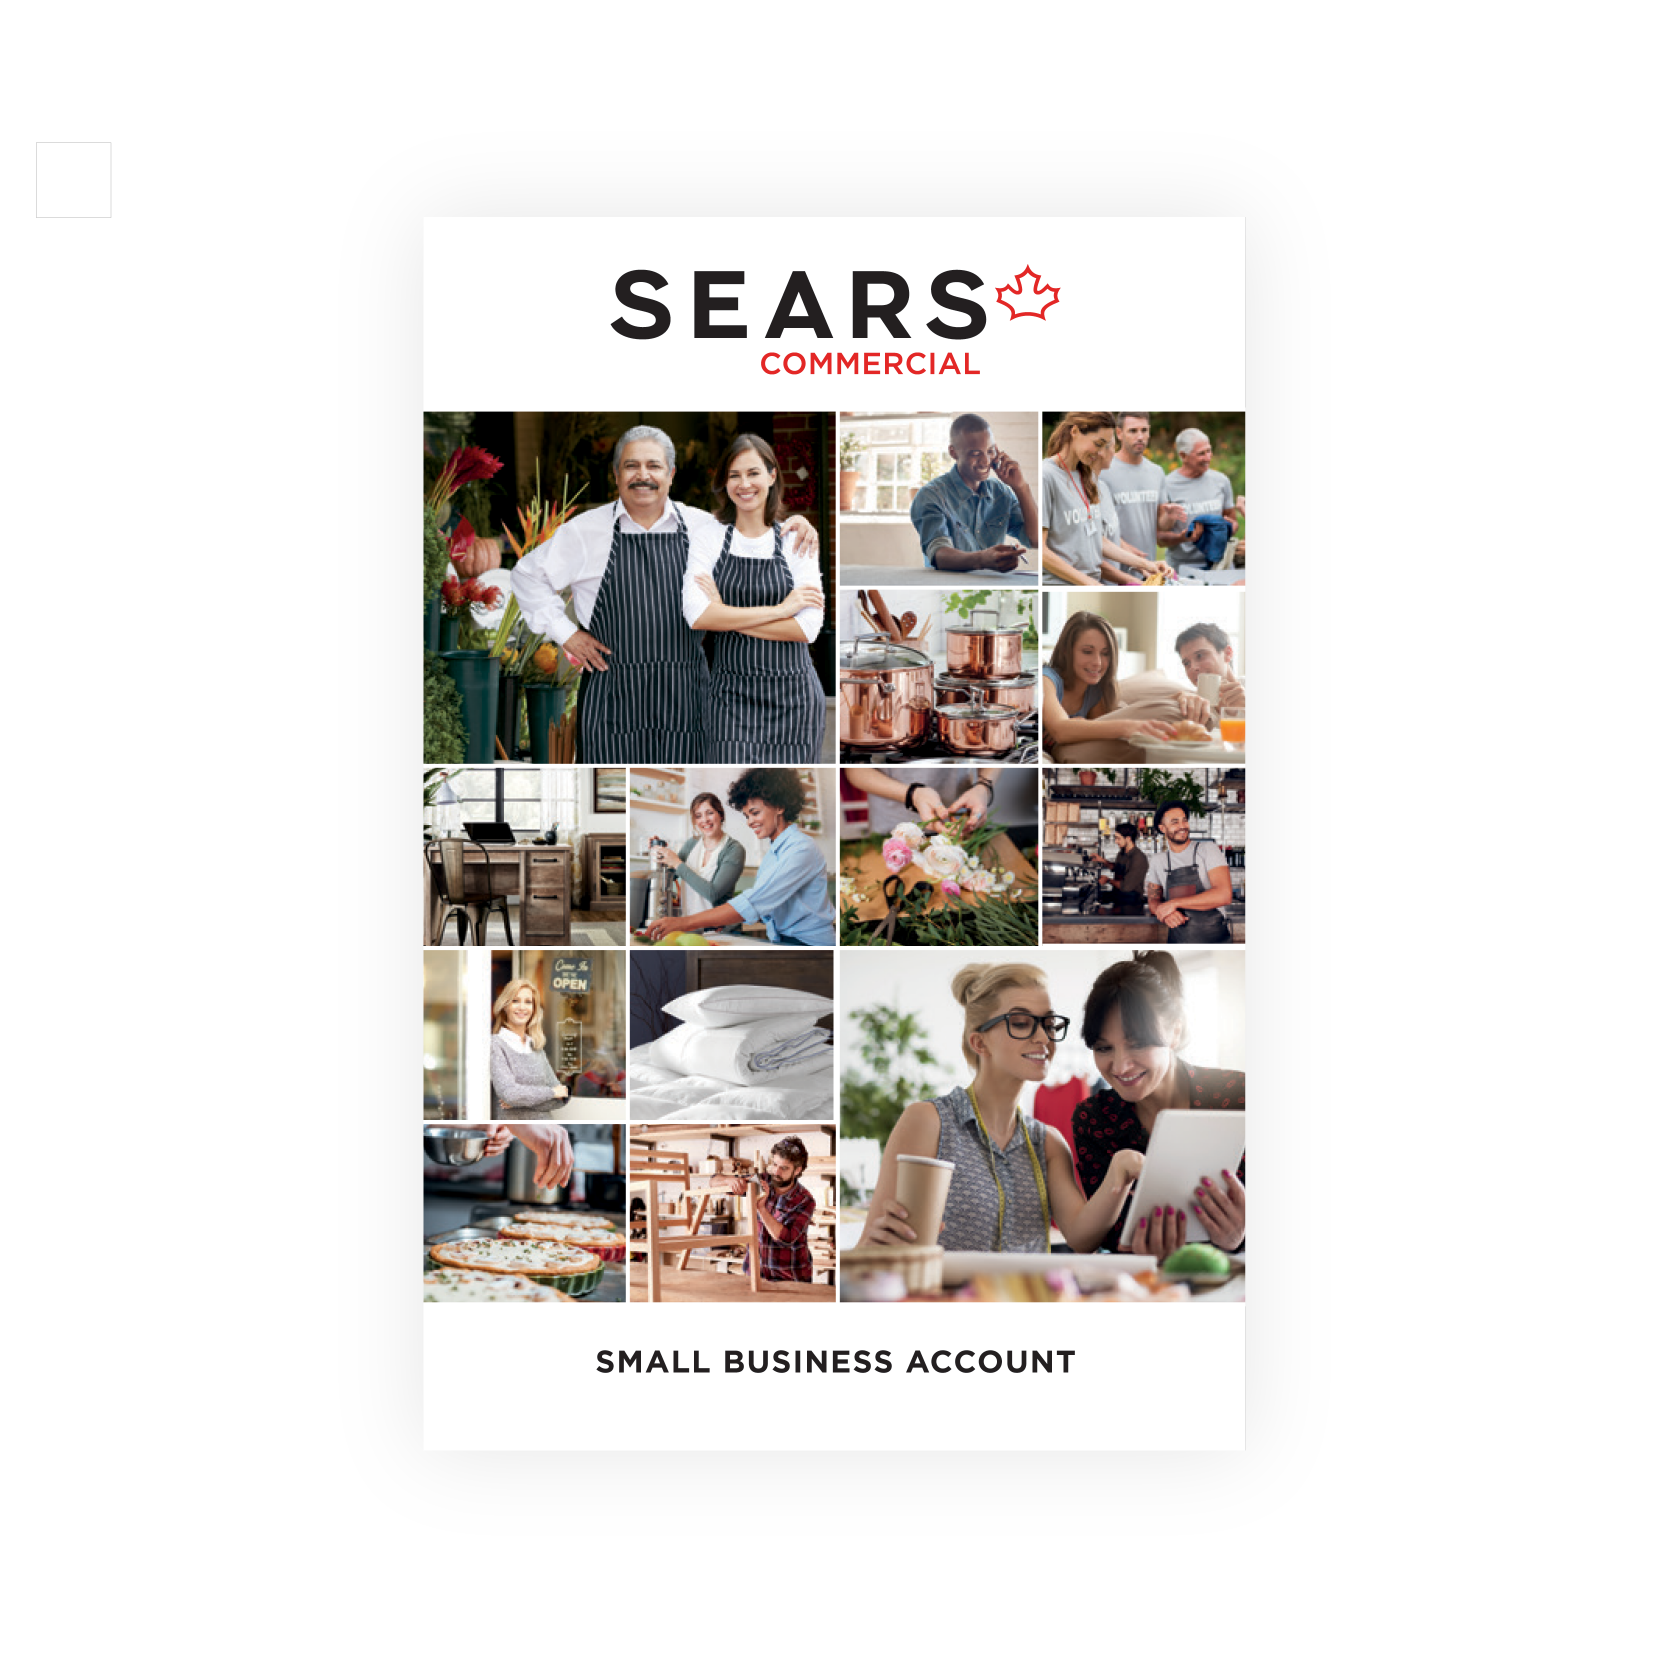 Sears Small Business Account